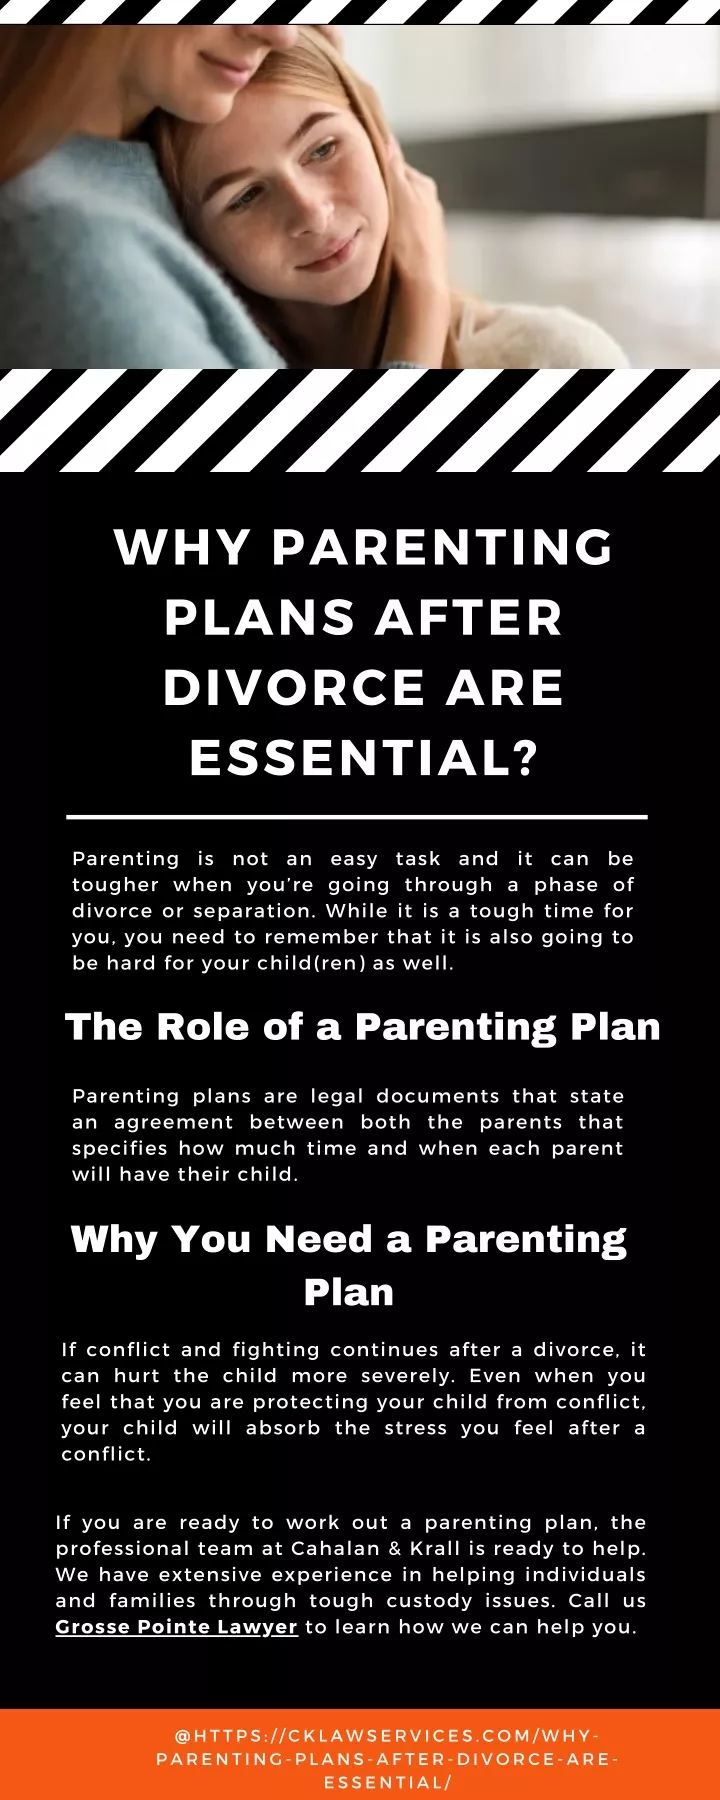 why parenting plans after divorce are essential